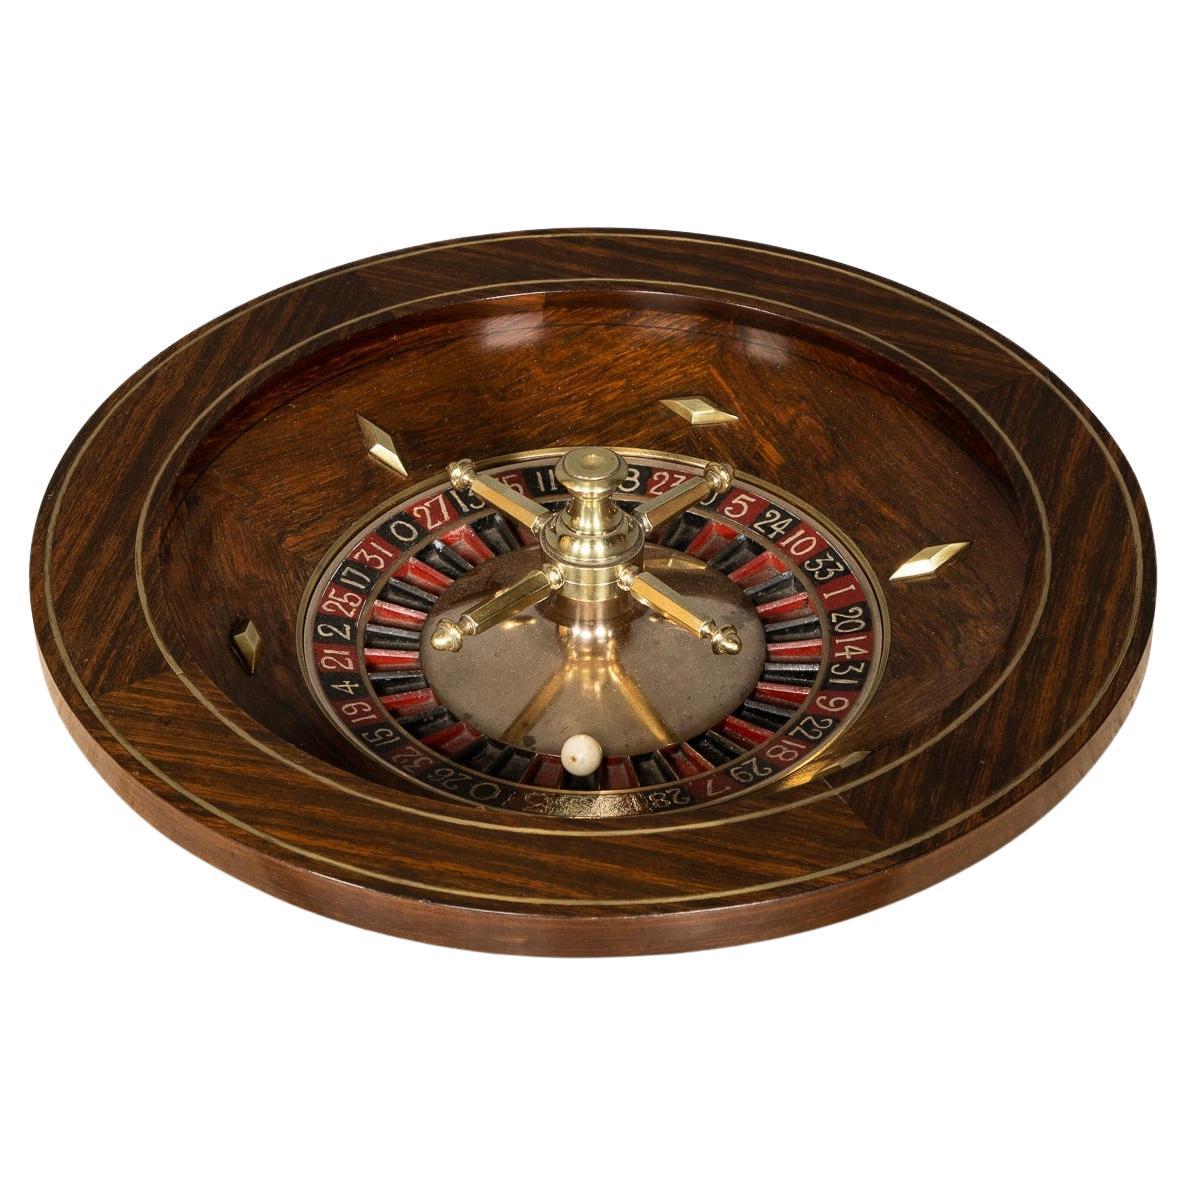 20th Century Novelty Working Roulette Wheel, c.1900